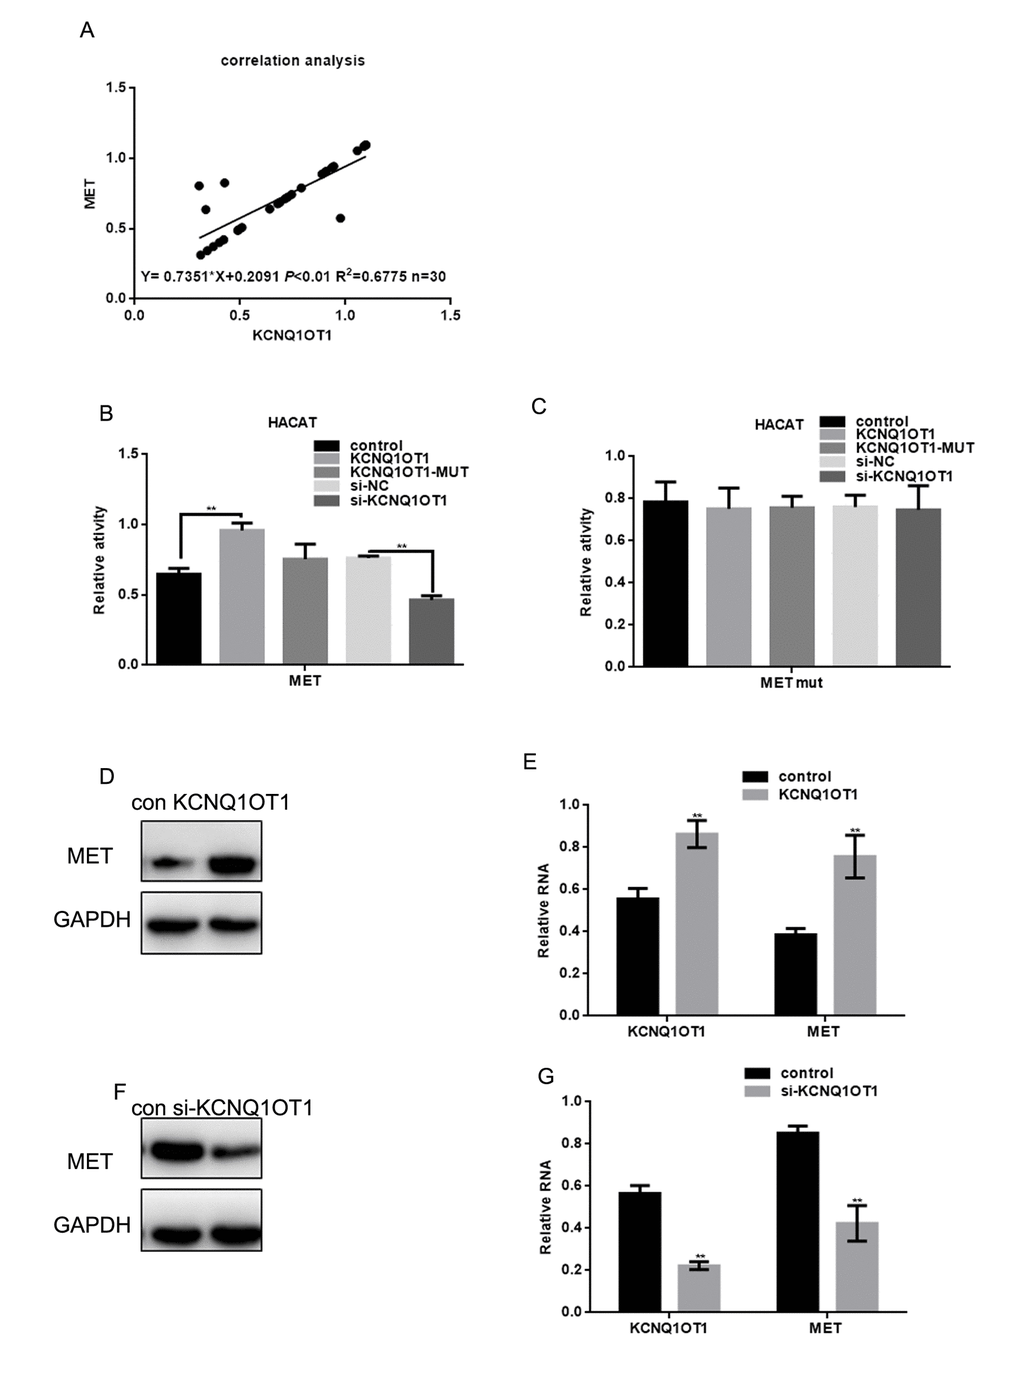 Overexpression of MET enhances transcription and lncRNA-coated territory of KCNQ1OT1. (A) Correlation between MET expression and KCNQ1OT1. (B, C) Fluorescence intensity was measured in HACAT cells co transfected with KCNQ1OT1, KCNQ1OT1 MUT or si-KCNQ1OT1, and MET WT/MUT construct. Vector was used as a control. (D, E) After transfecting KCNQ1OT1/control in A375 cells, MET level was detected by western blot and real time PCR. Data are shown as mean ± SEM. ** PF, G) After transfecting si-KCNQ1OT1 or control in A375 cells, MET level was detected by western blot and real time PCR. Data are shown as mean ± SEM. ** P